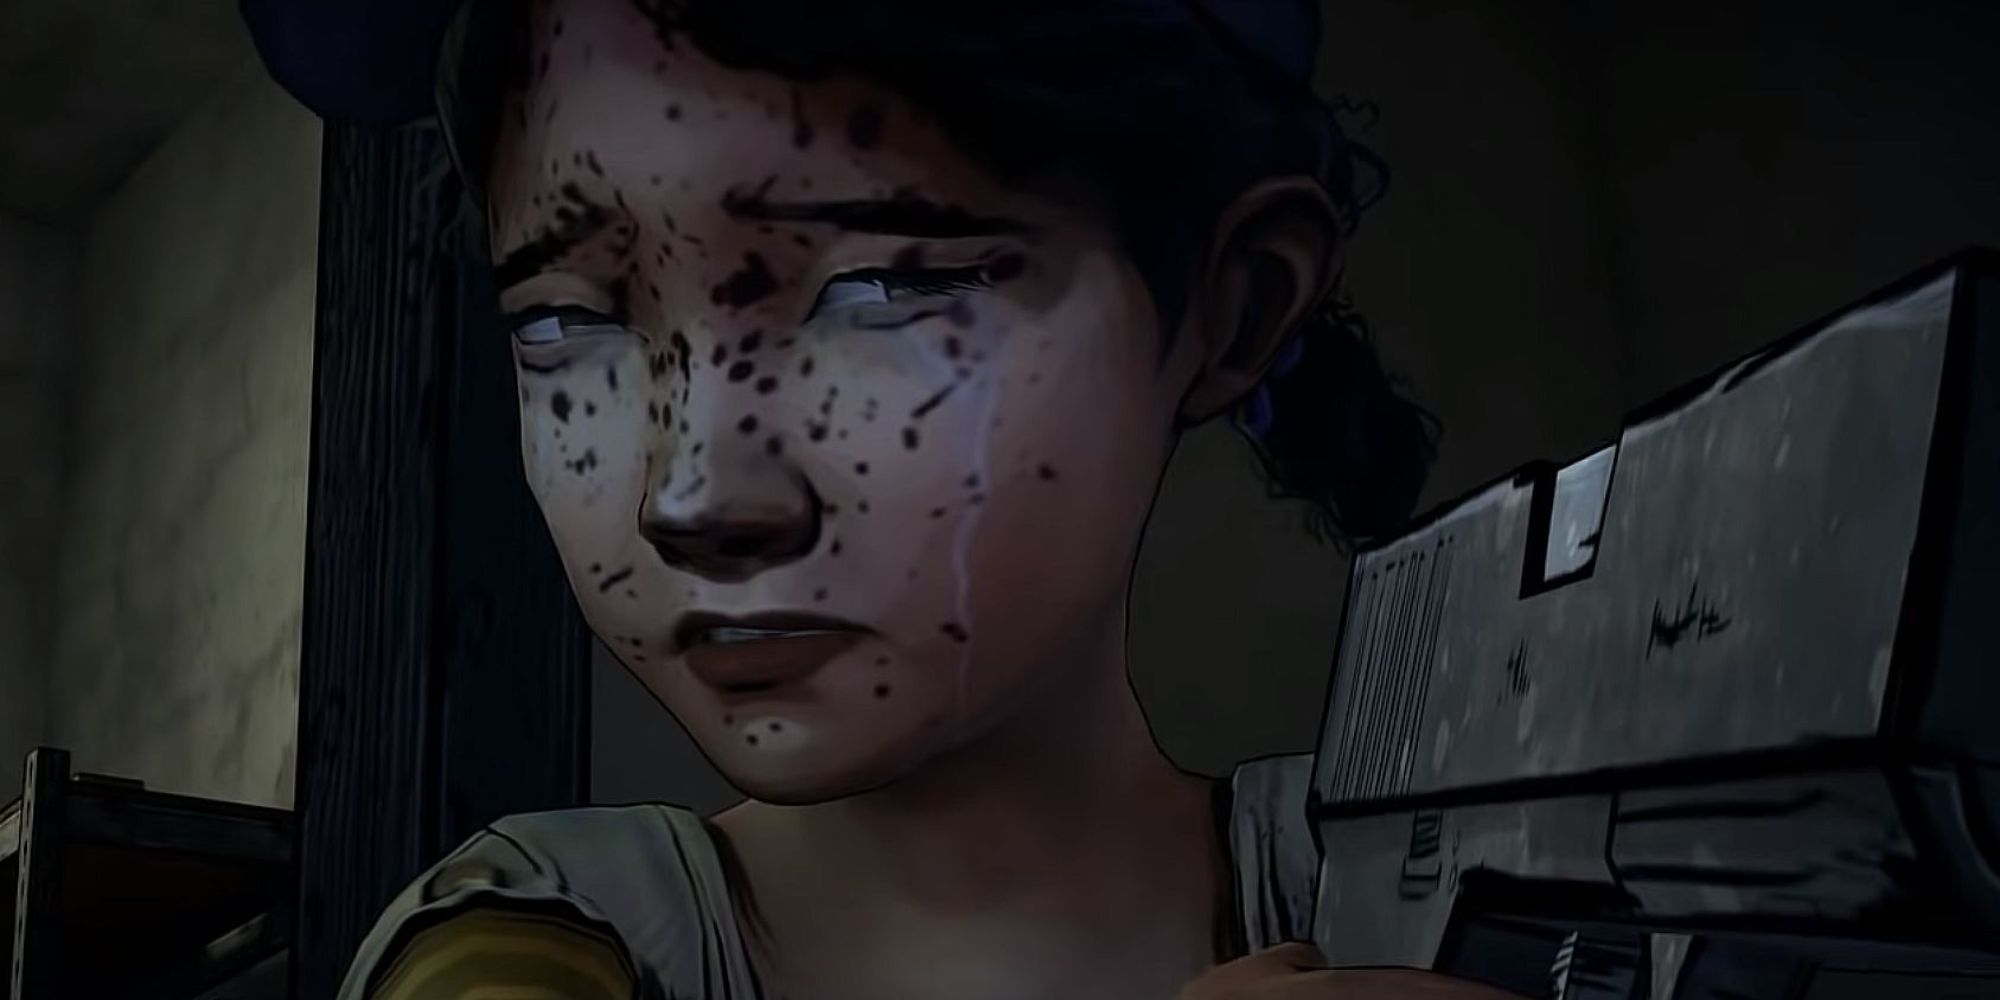 Telltale’s The Walking Dead Clementine holding gun at lee's face